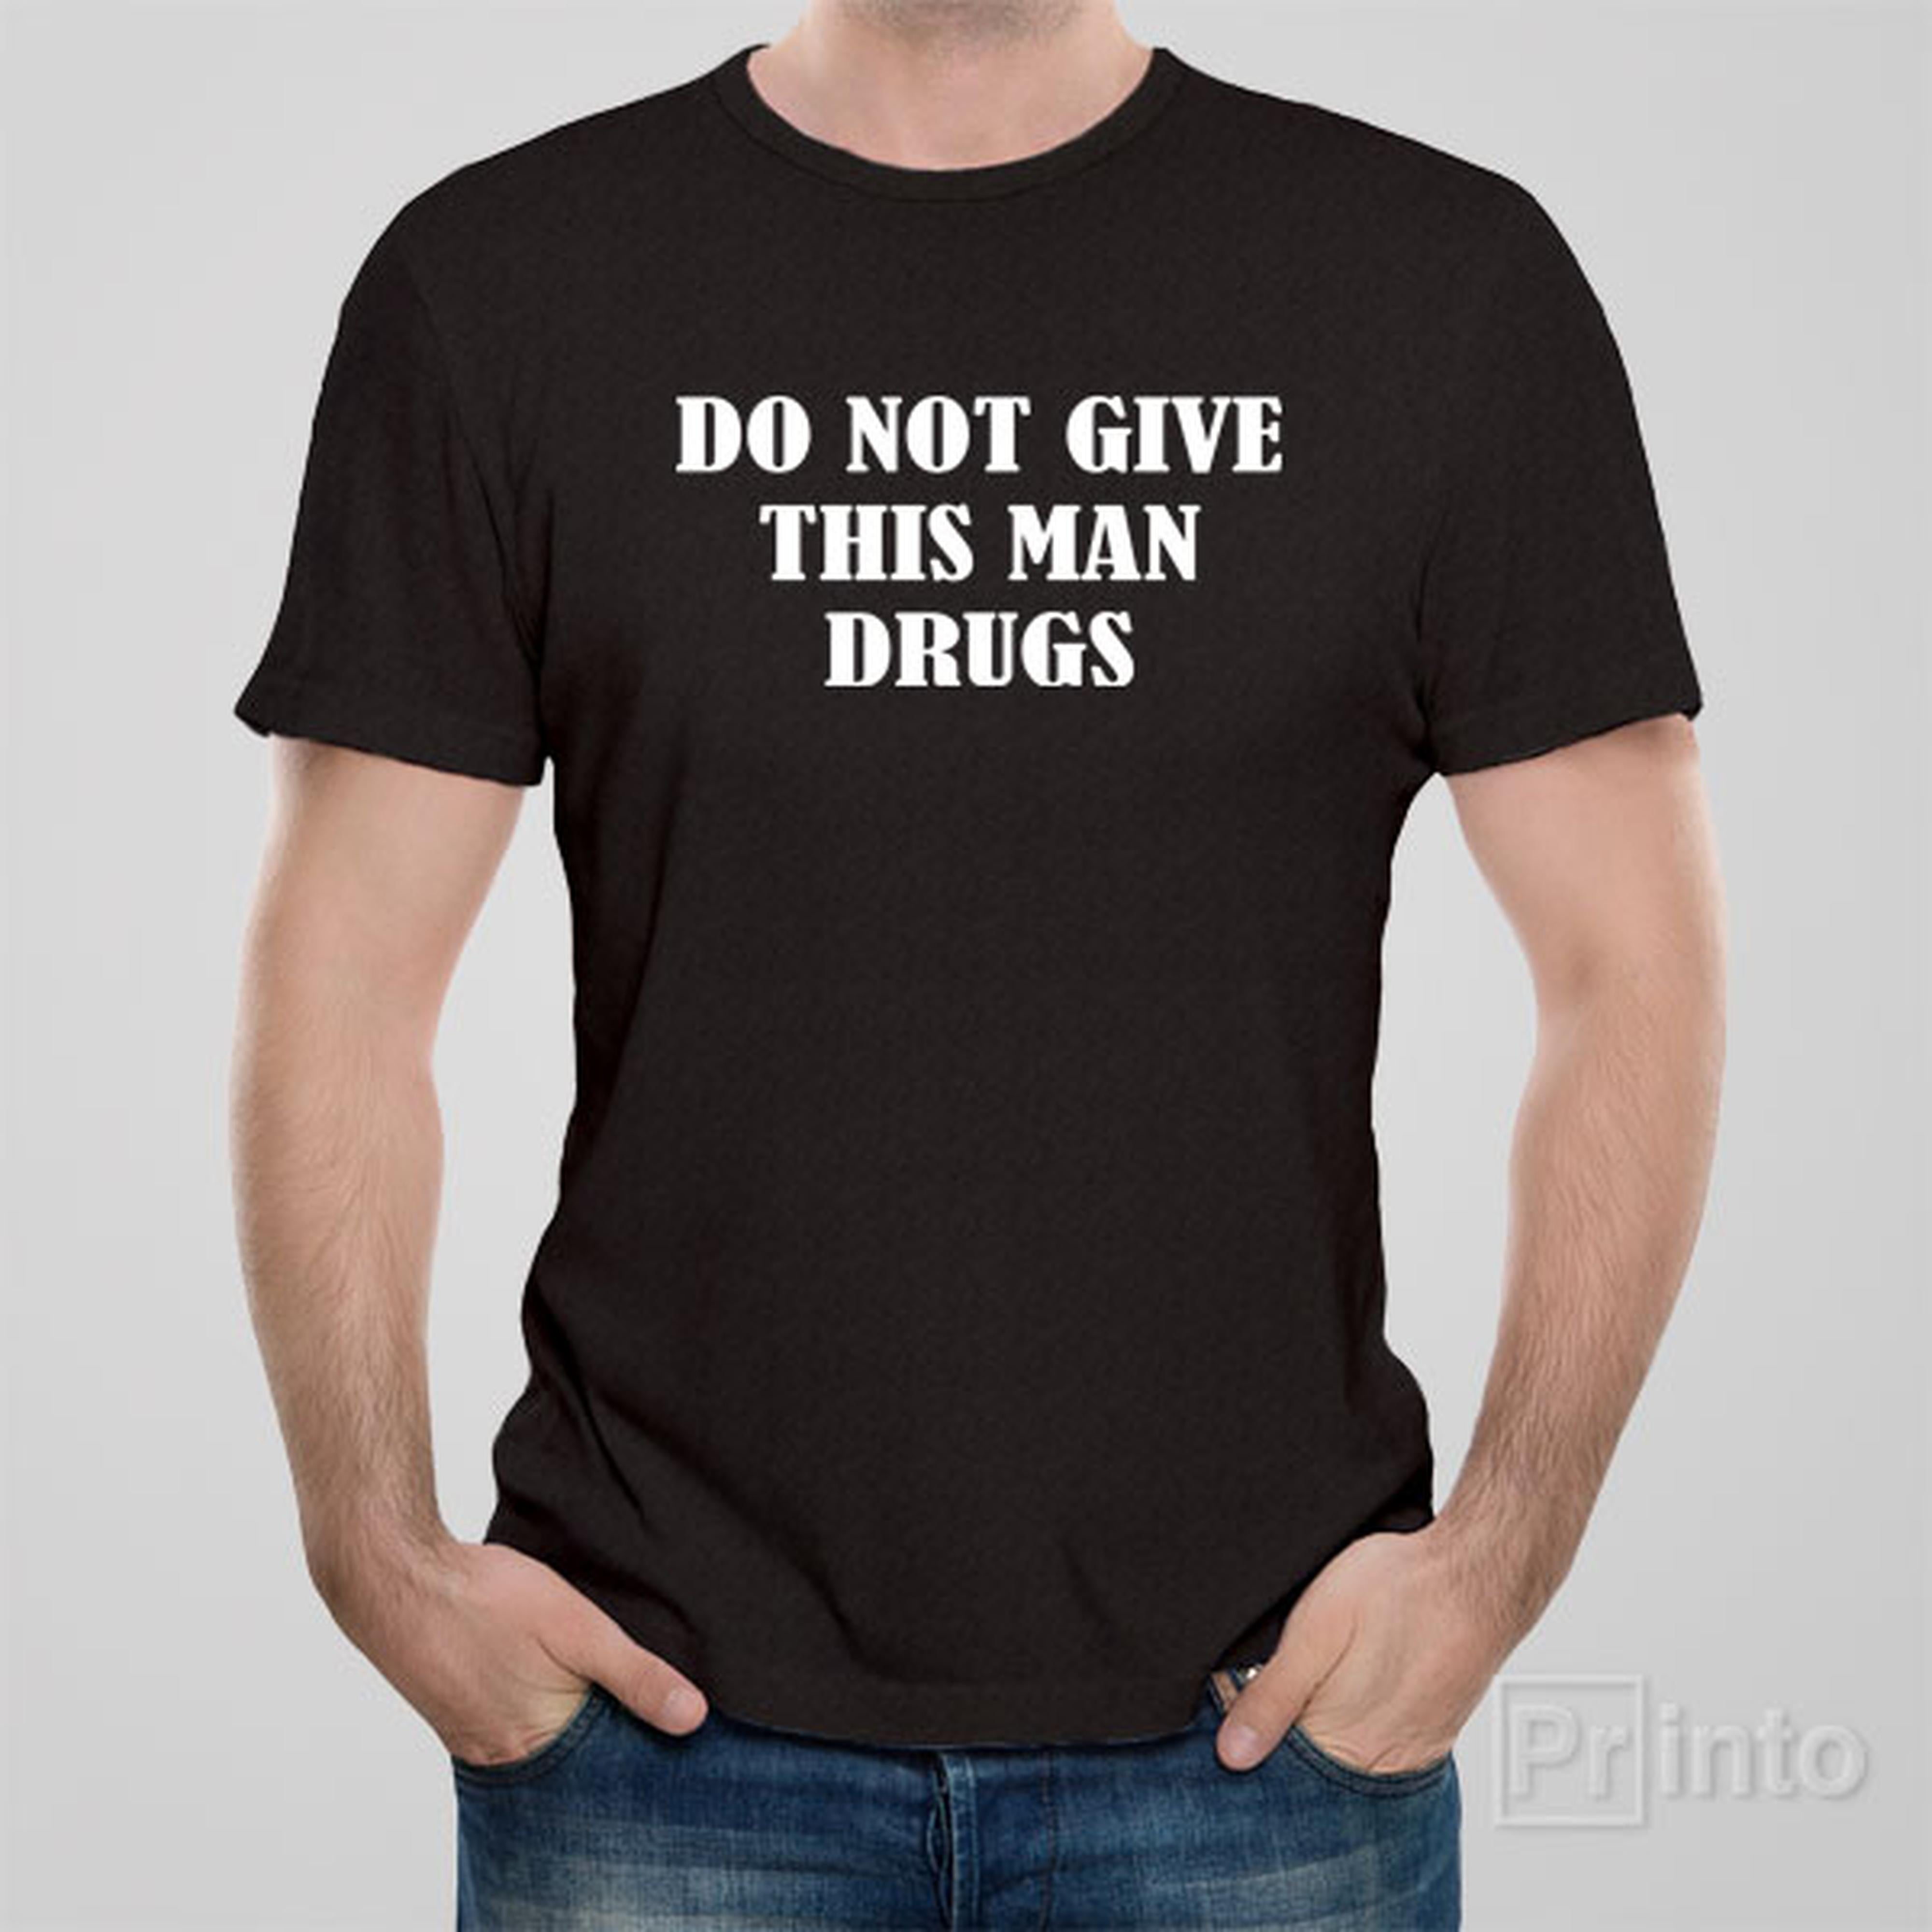 do-not-give-this-man-drugs-t-shirt